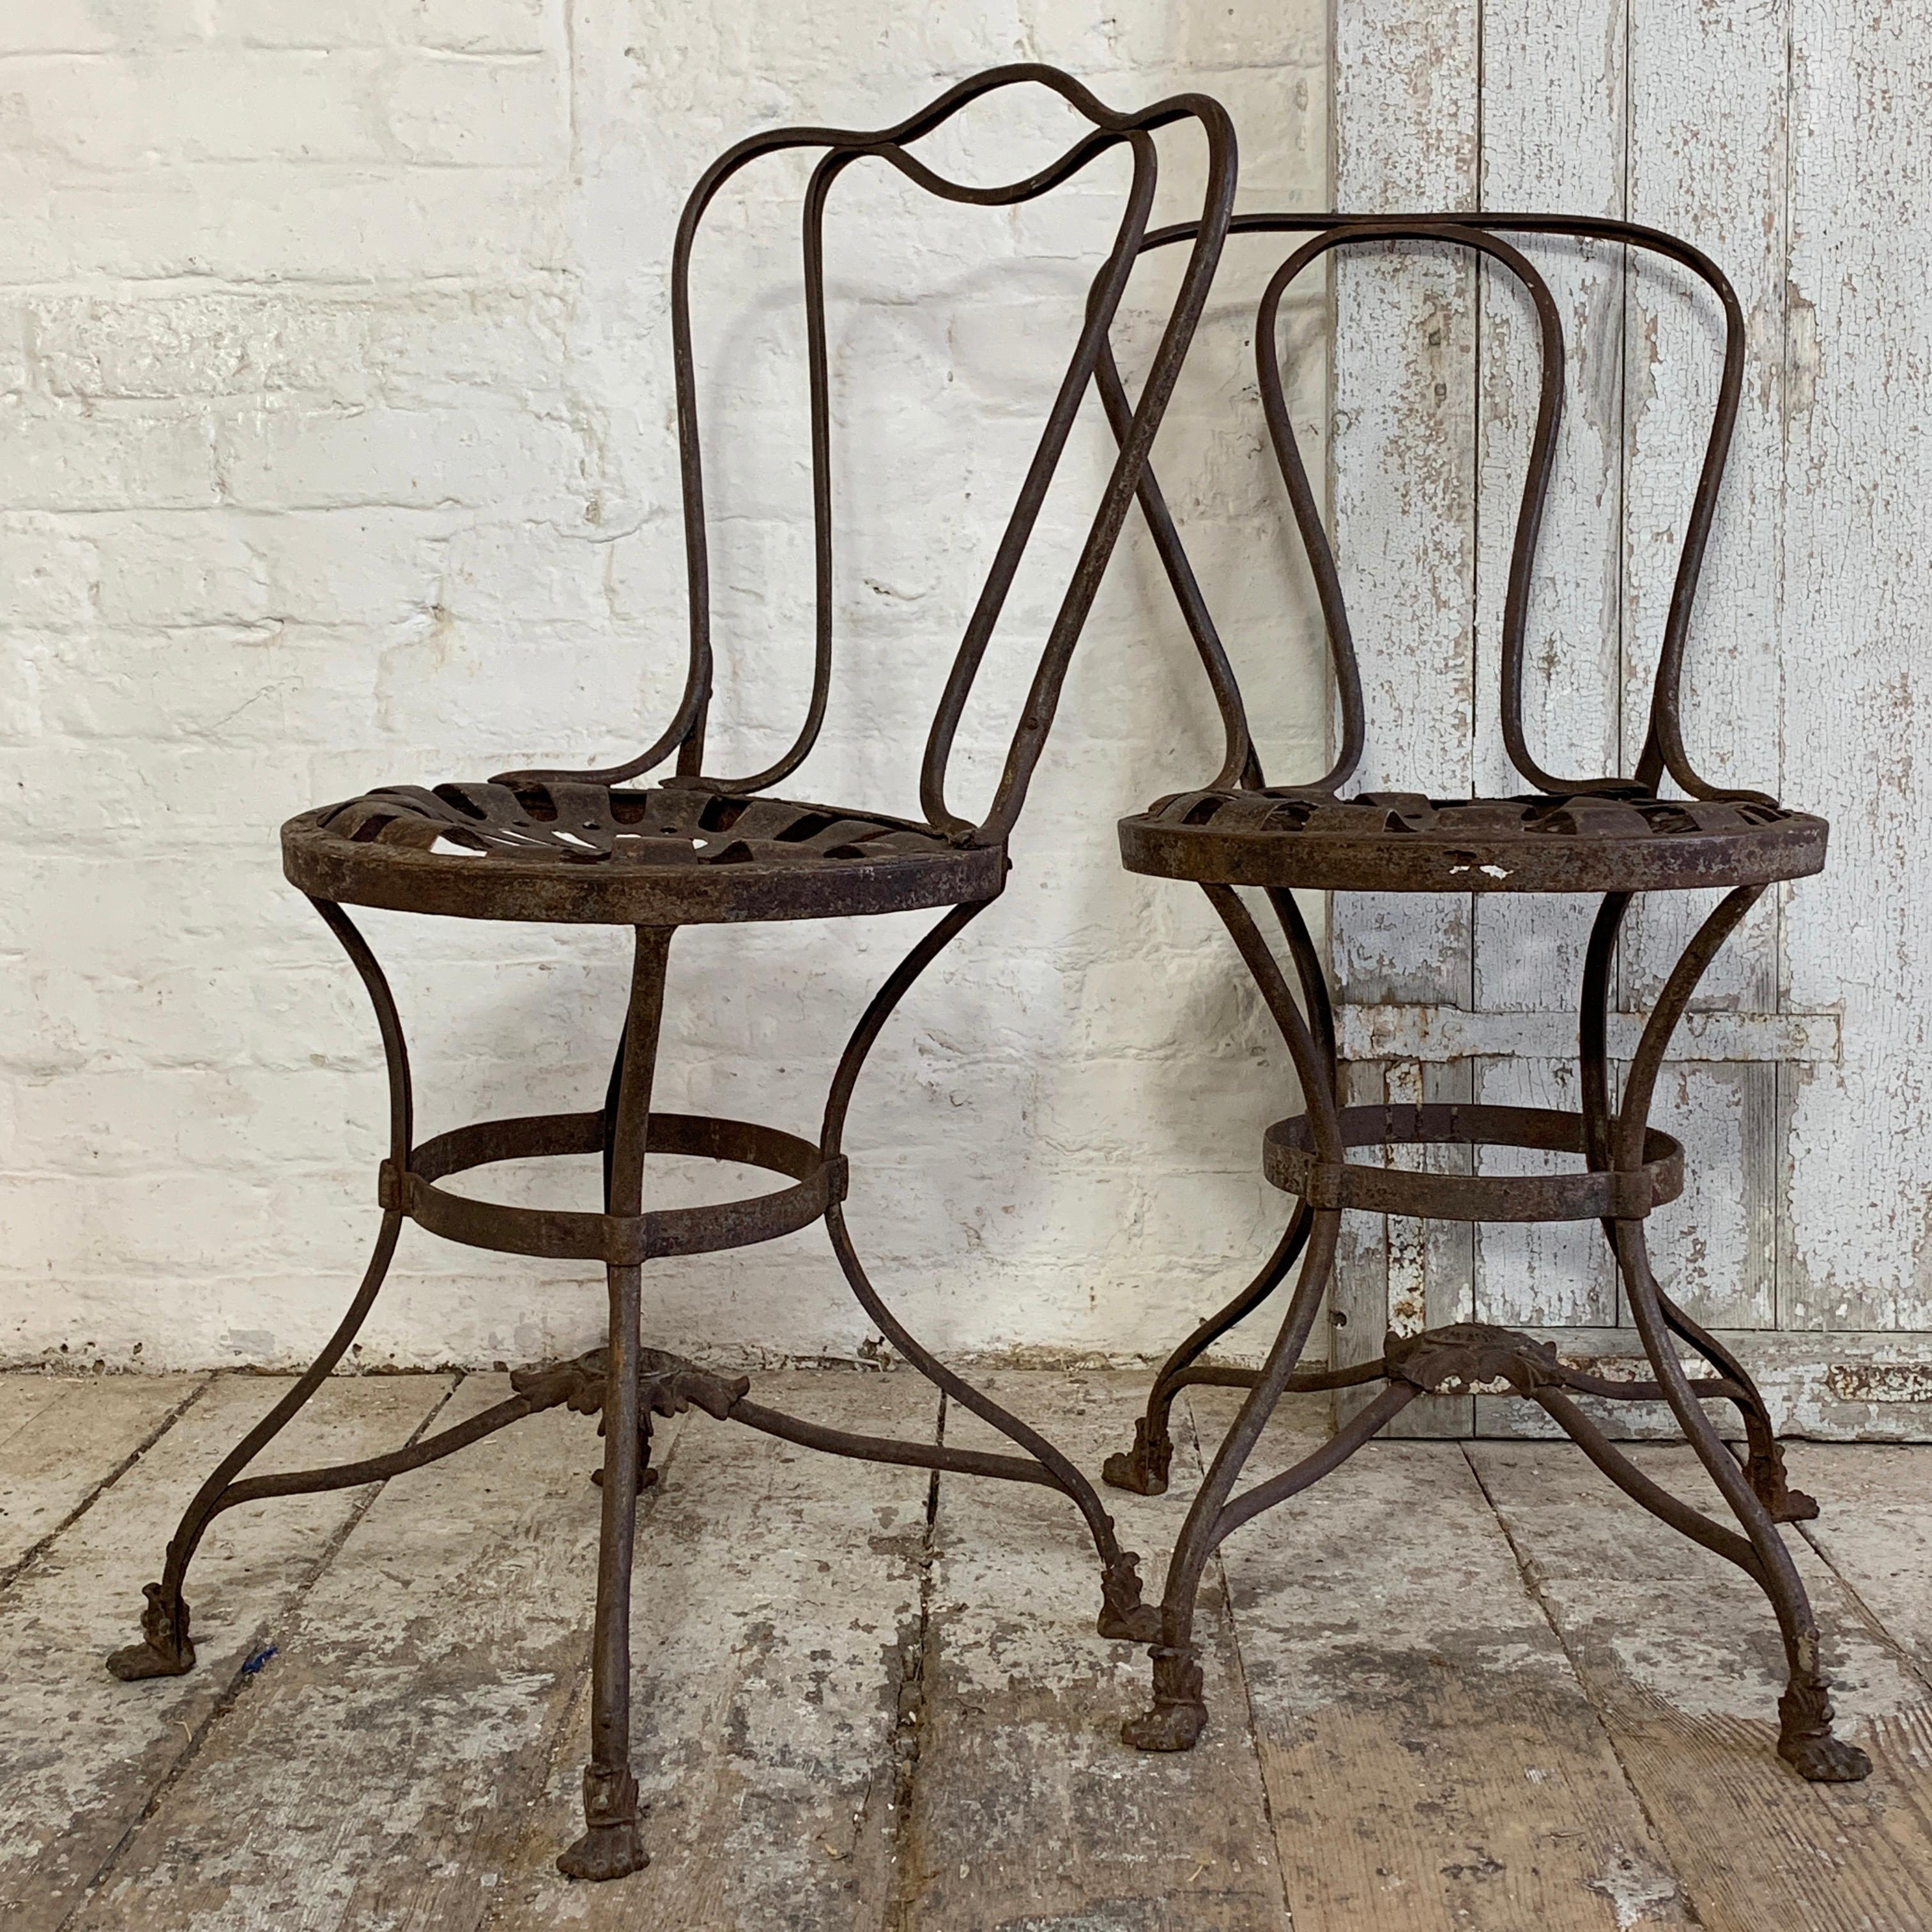 Late 19th Century French Grassin Arras Garden Chairs 4